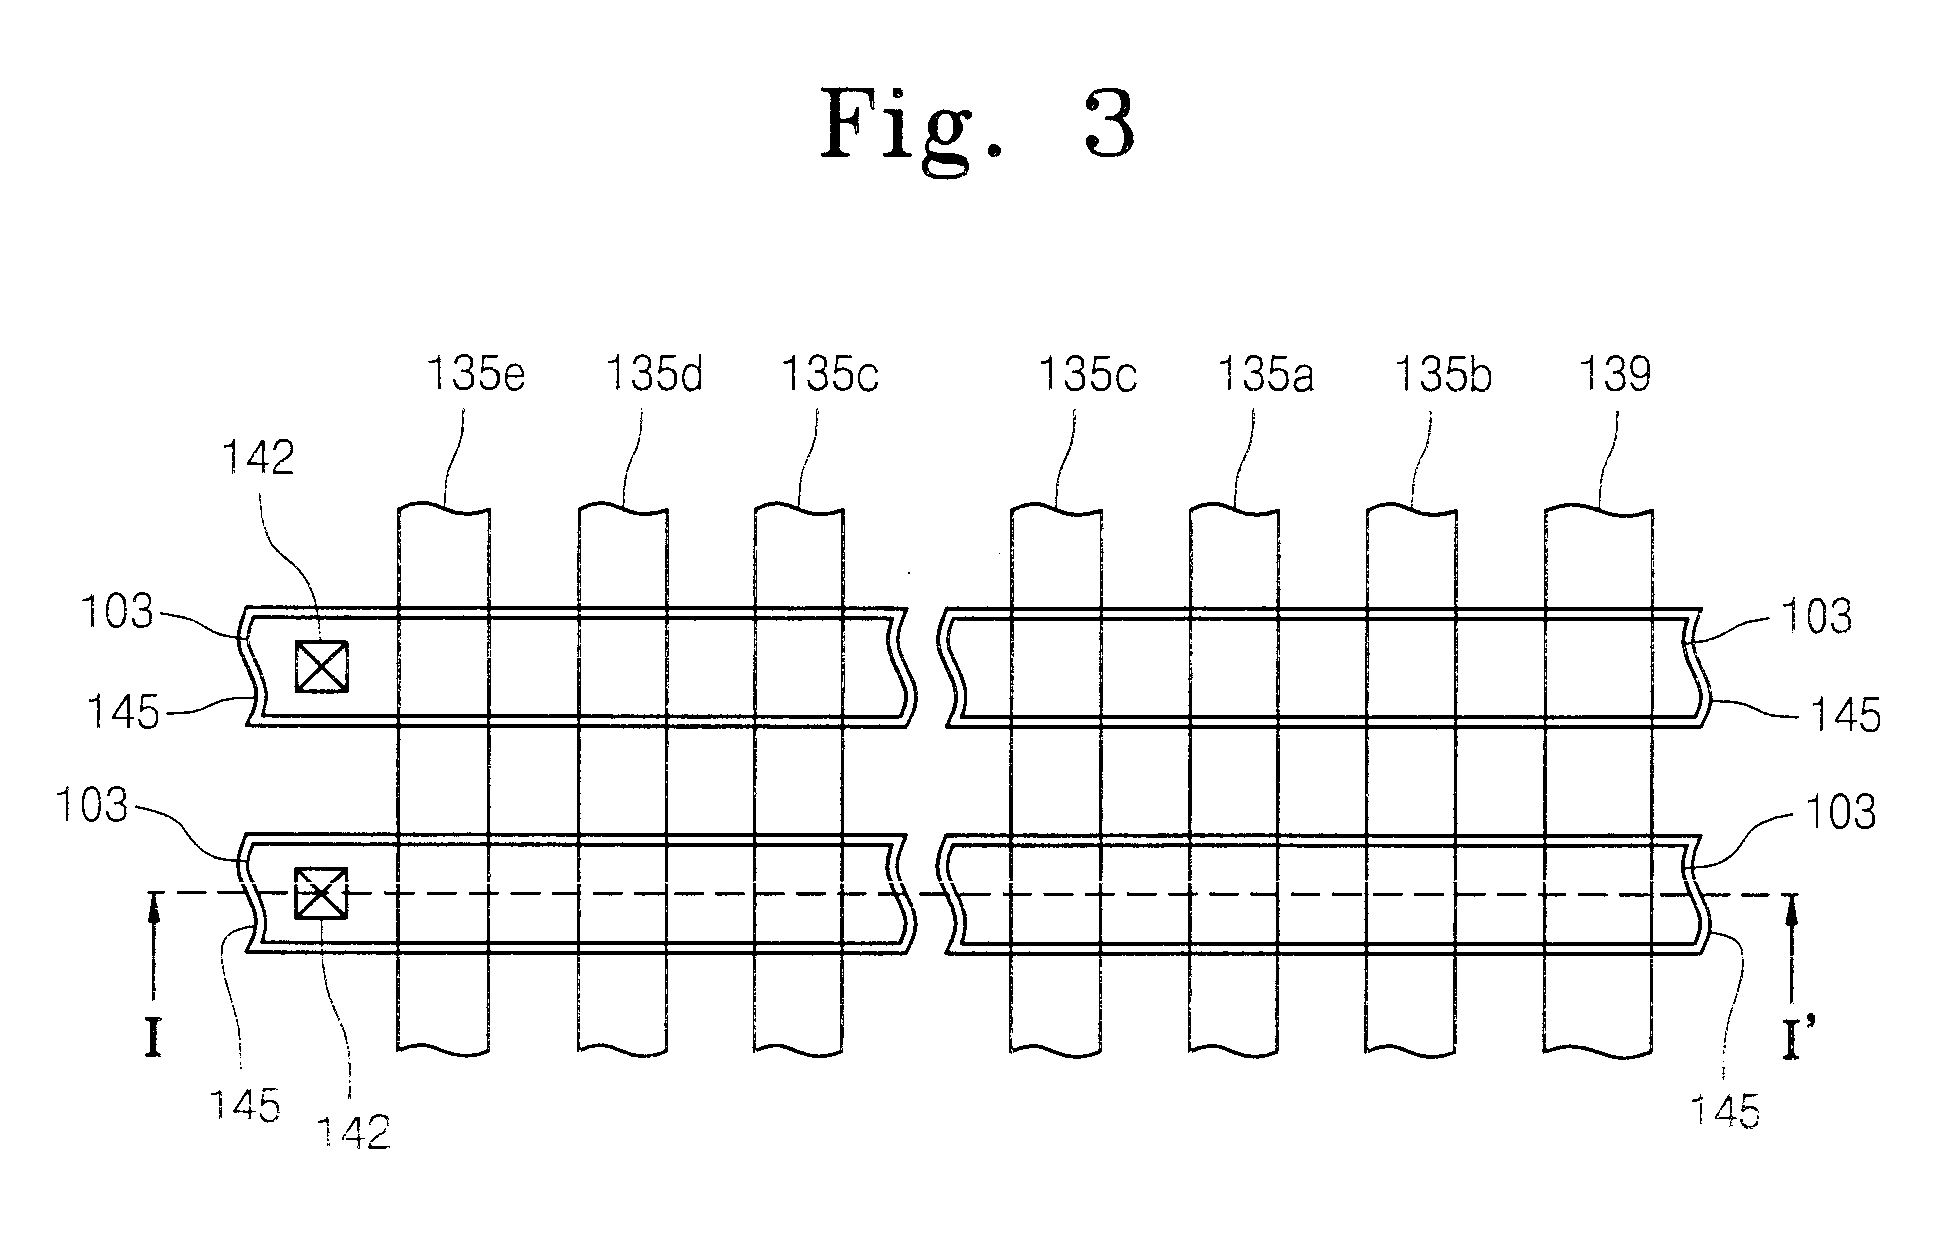 NAND flash memory device and methods of its formation and operation